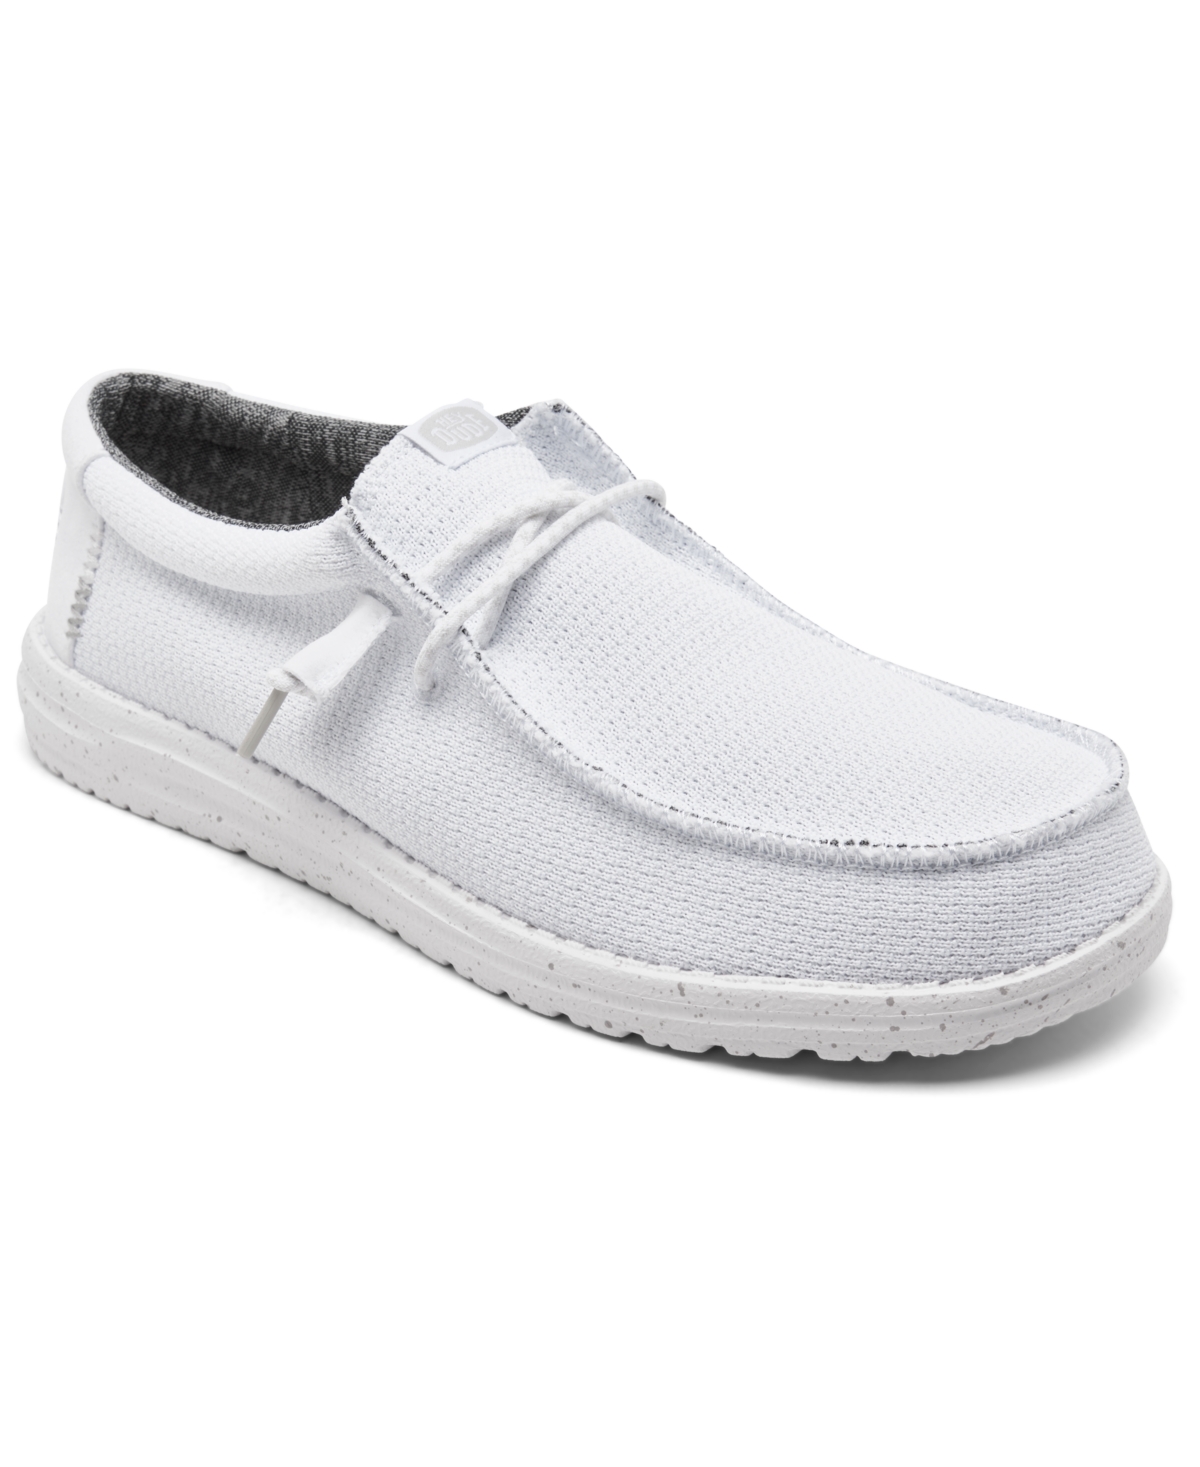 Men's Wally Sport Mesh Casual Moccasin Sneakers from Finish Line - White